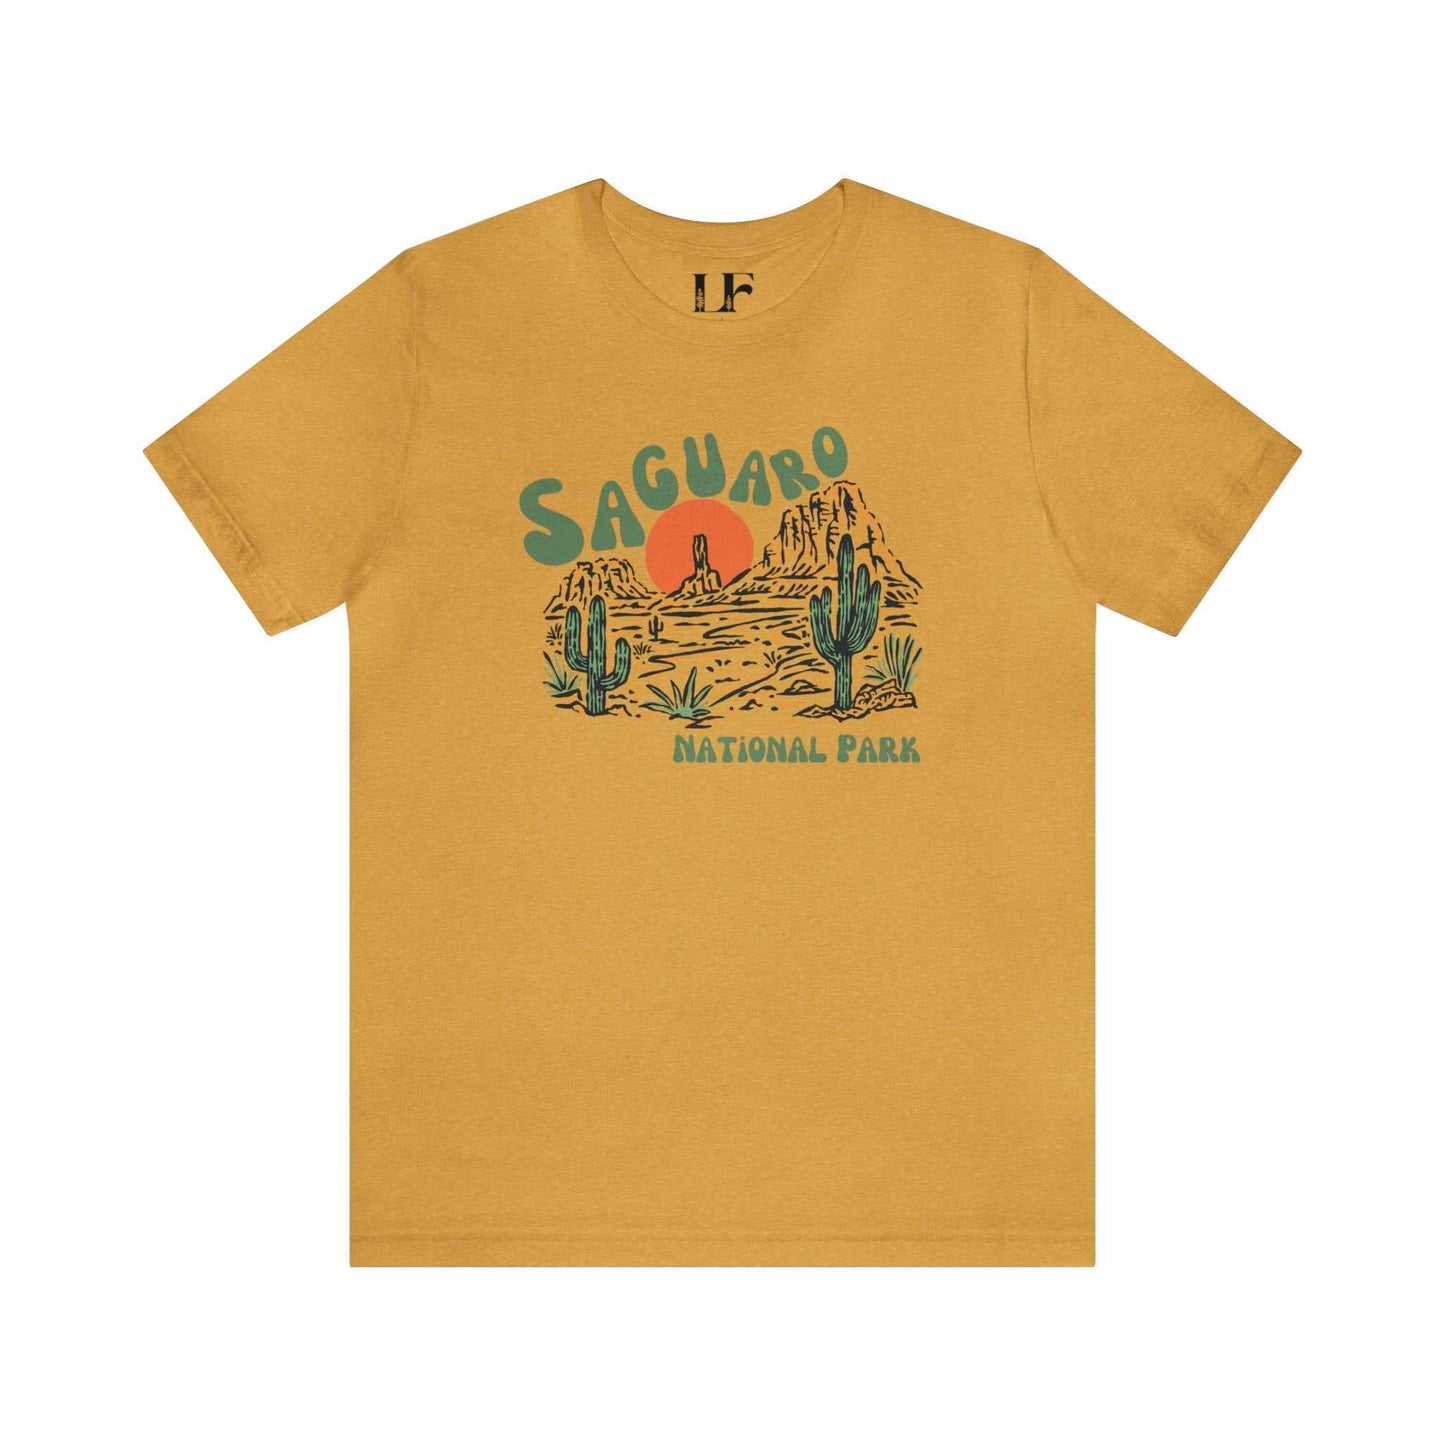 Saguaro National Park Shirt TrippyBring the beauty of Saguaro National Park into your wardrobe with this 70s retro and vintage styled oversized boyfriend t-shirt inspired by the magic of this iconic 